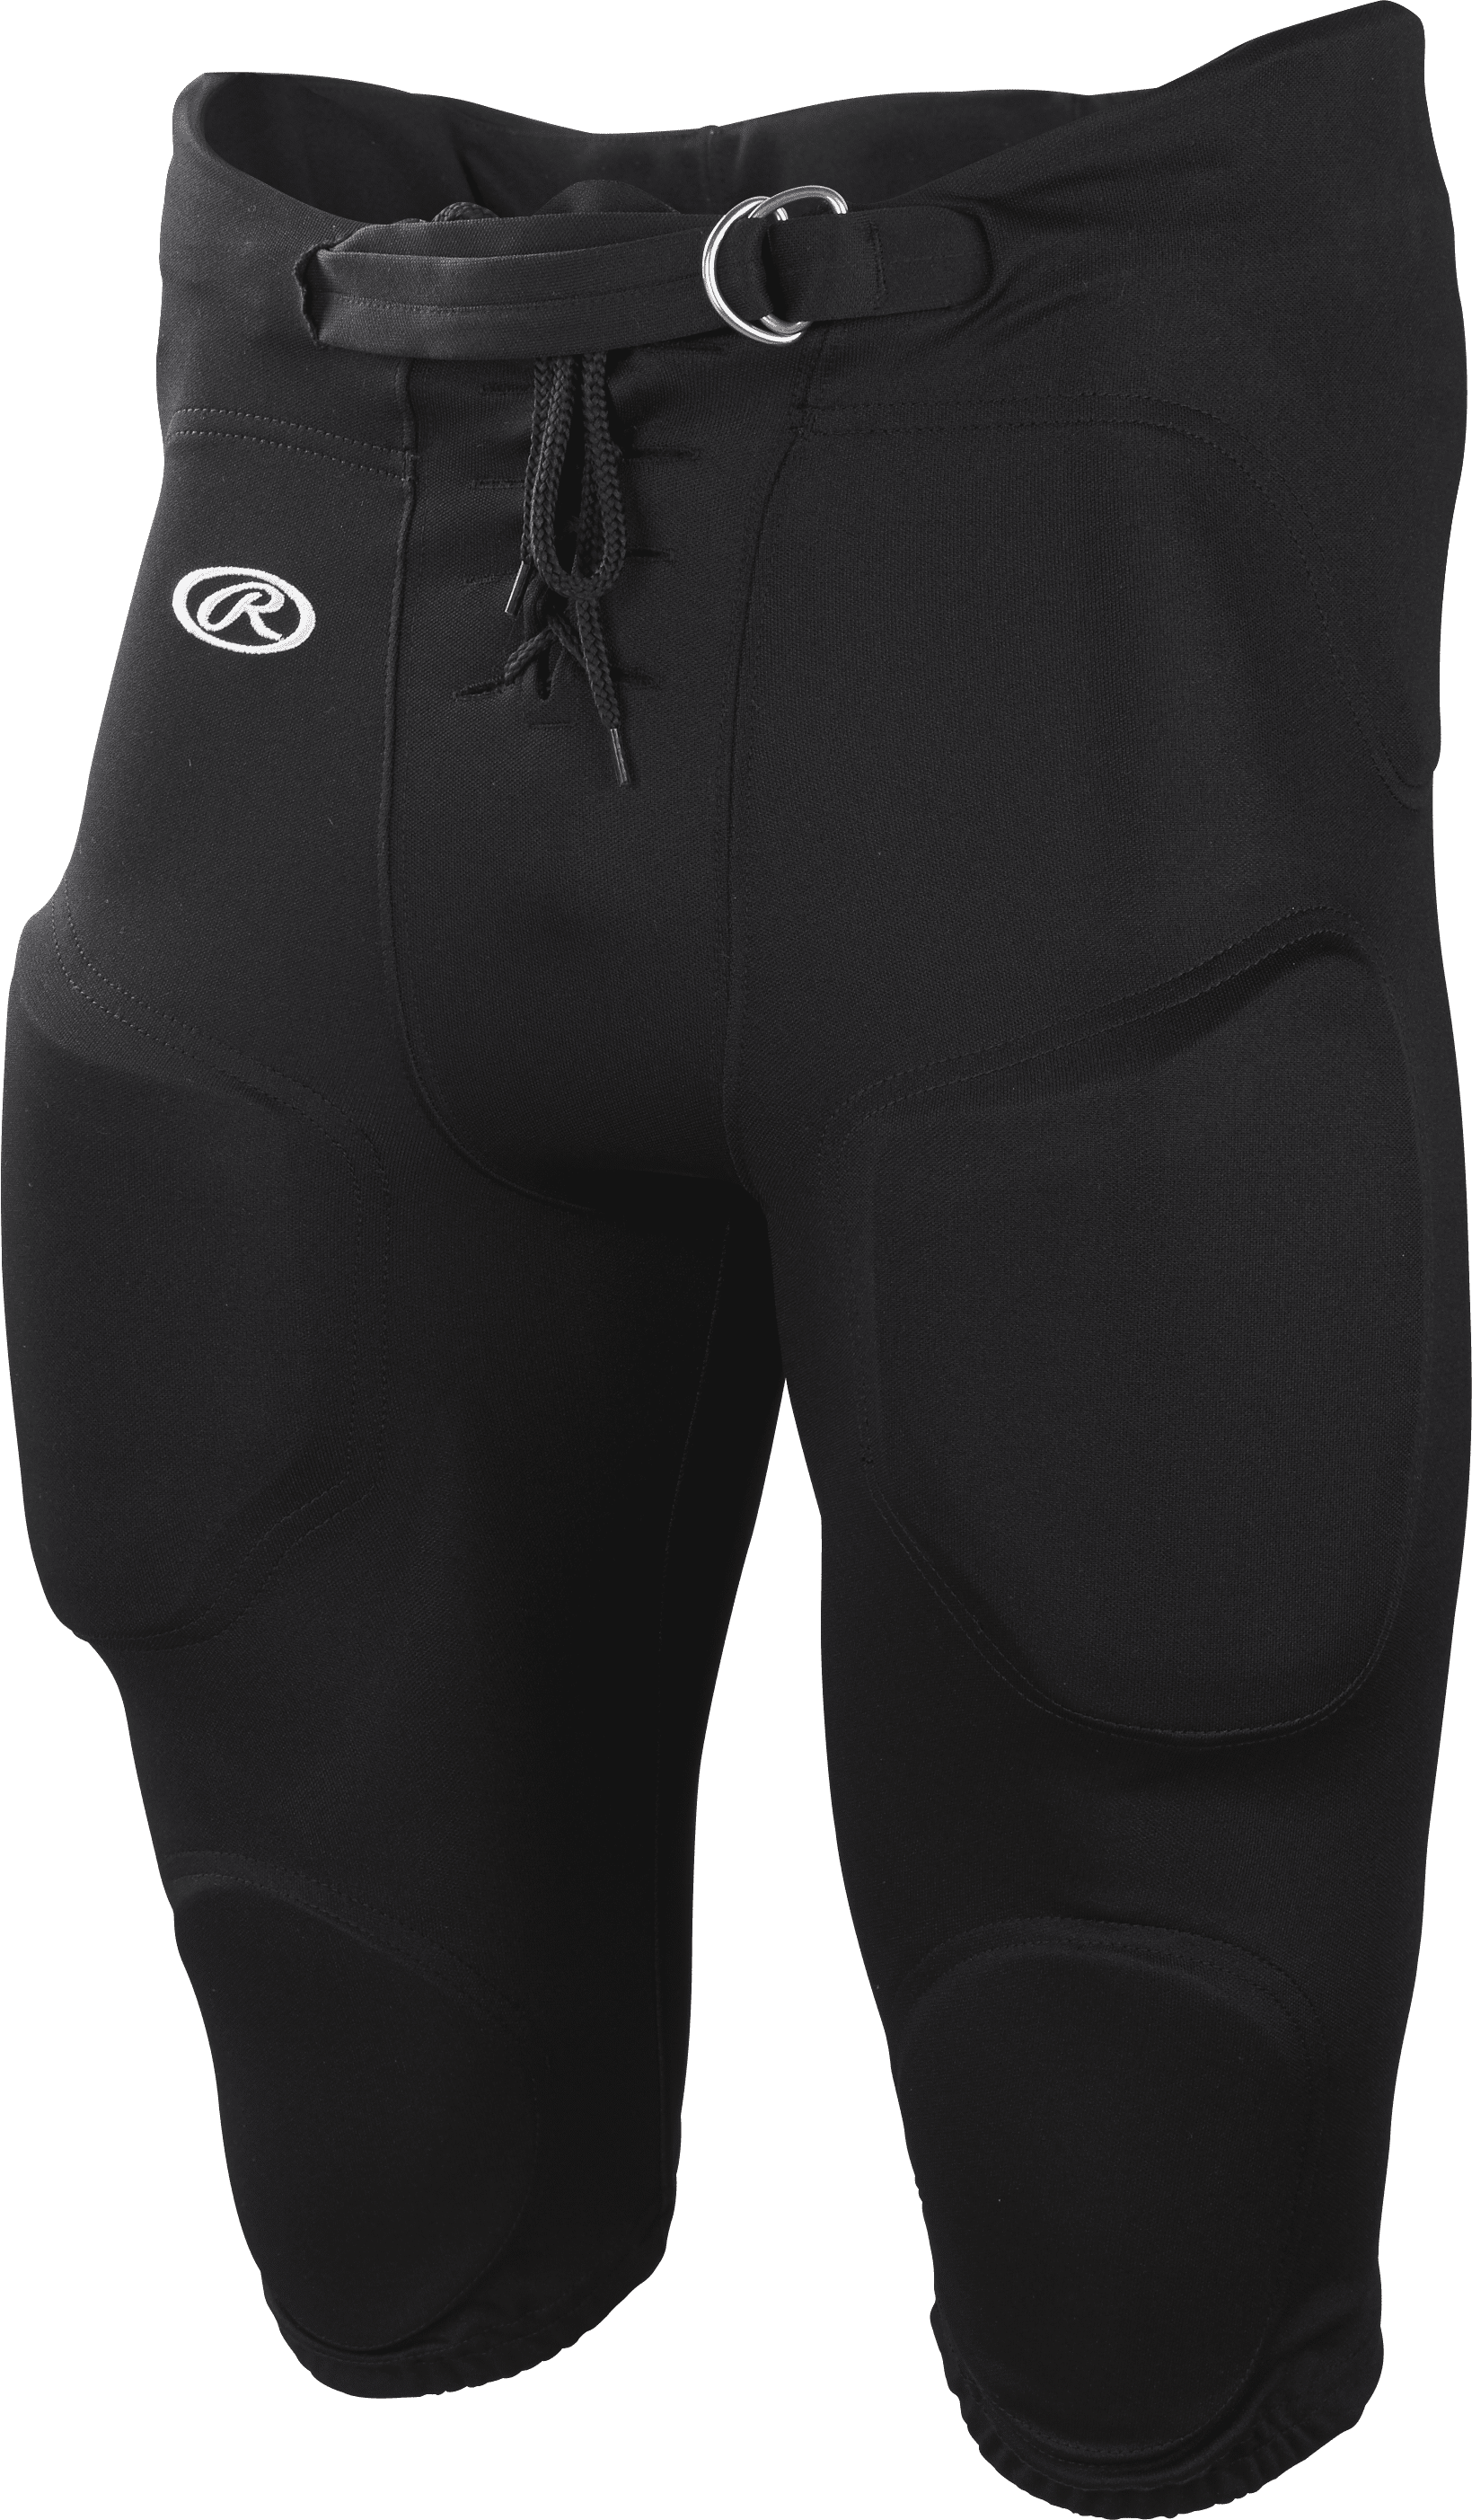 Russell Adult Black Game Practice Ready Football Pants Men's New!! Size: 3XL 